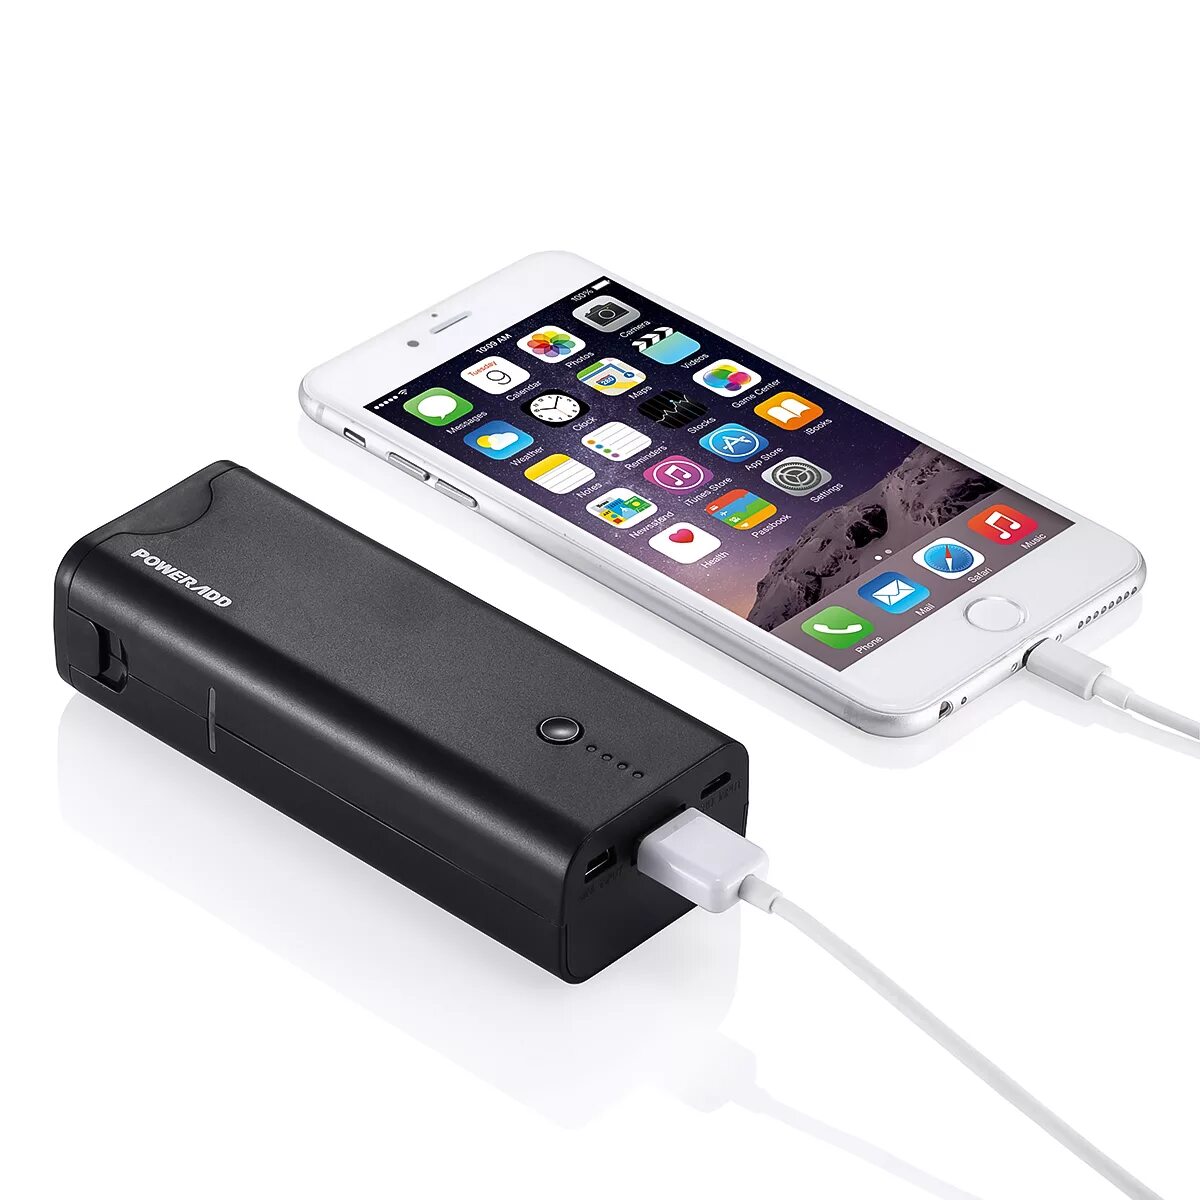 Charger for iphone. Portable Charger for iphone. Портативка для айфона. Портативная портативка на айфон. Портативное iphone